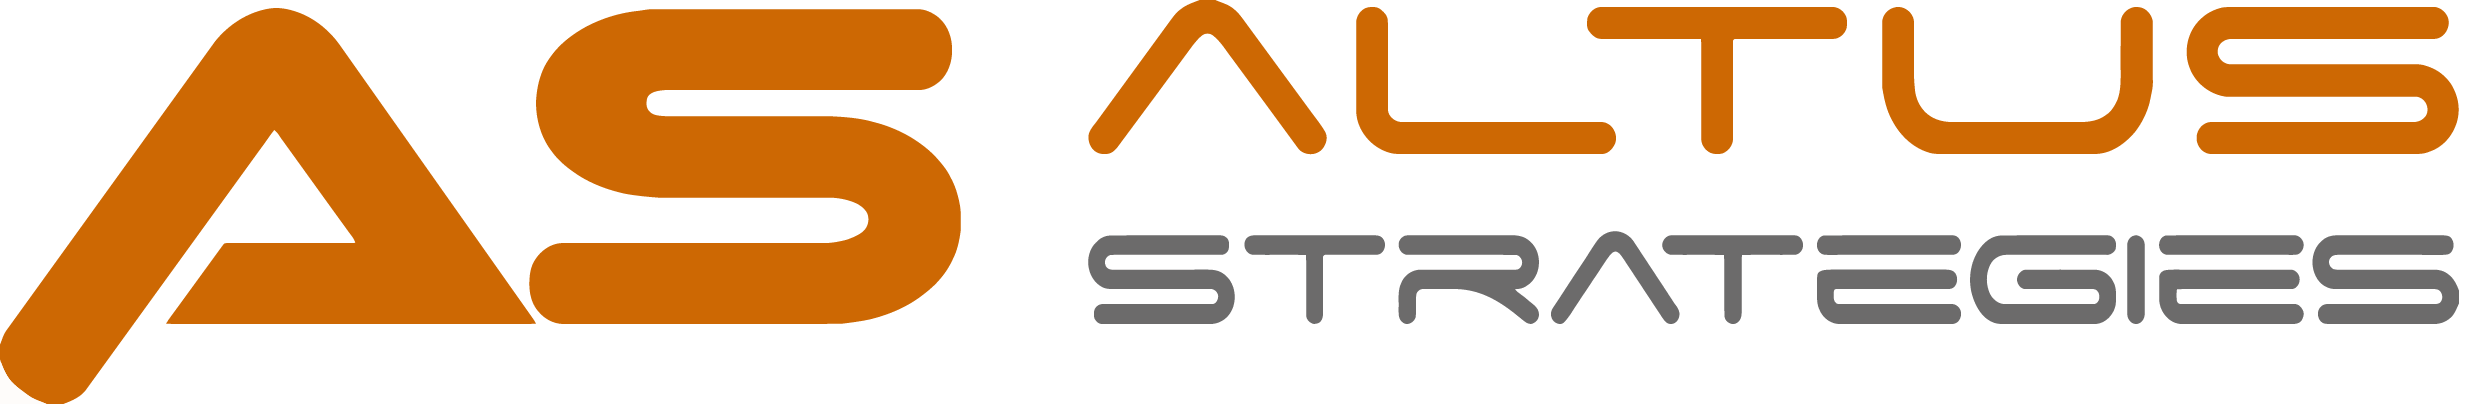 Altus Strategies Plc, Wednesday, January 27, 2021, Press release picture